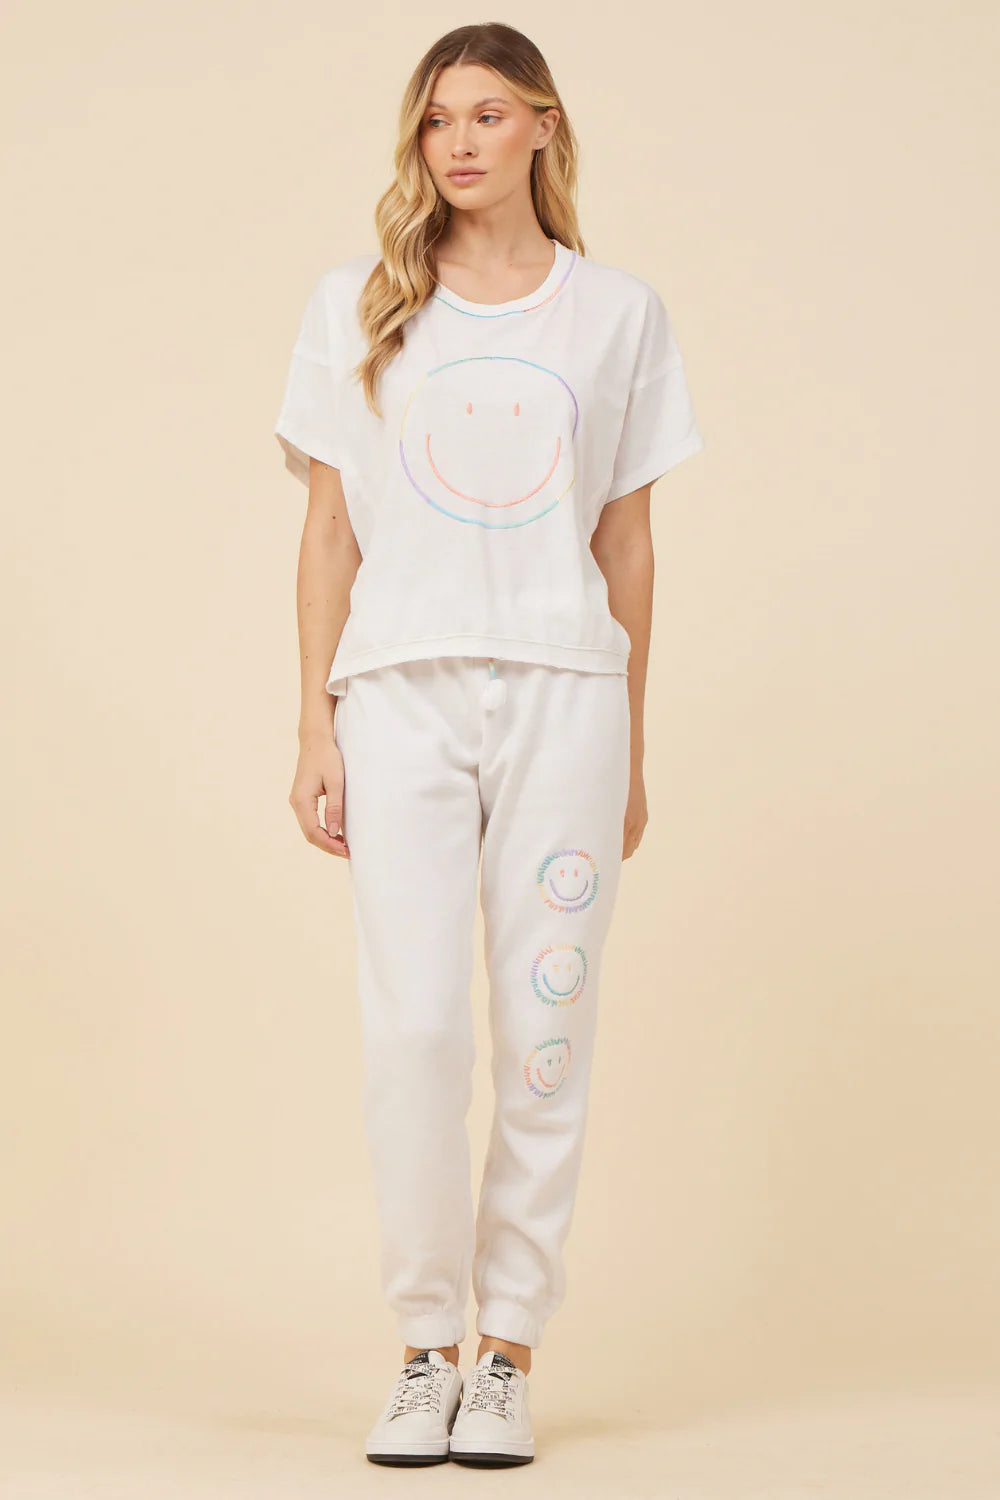 VINTAGE HAVANA BRIGHT WHITE W/ SORBET EMBROIDERED SMILEY FACE TEE